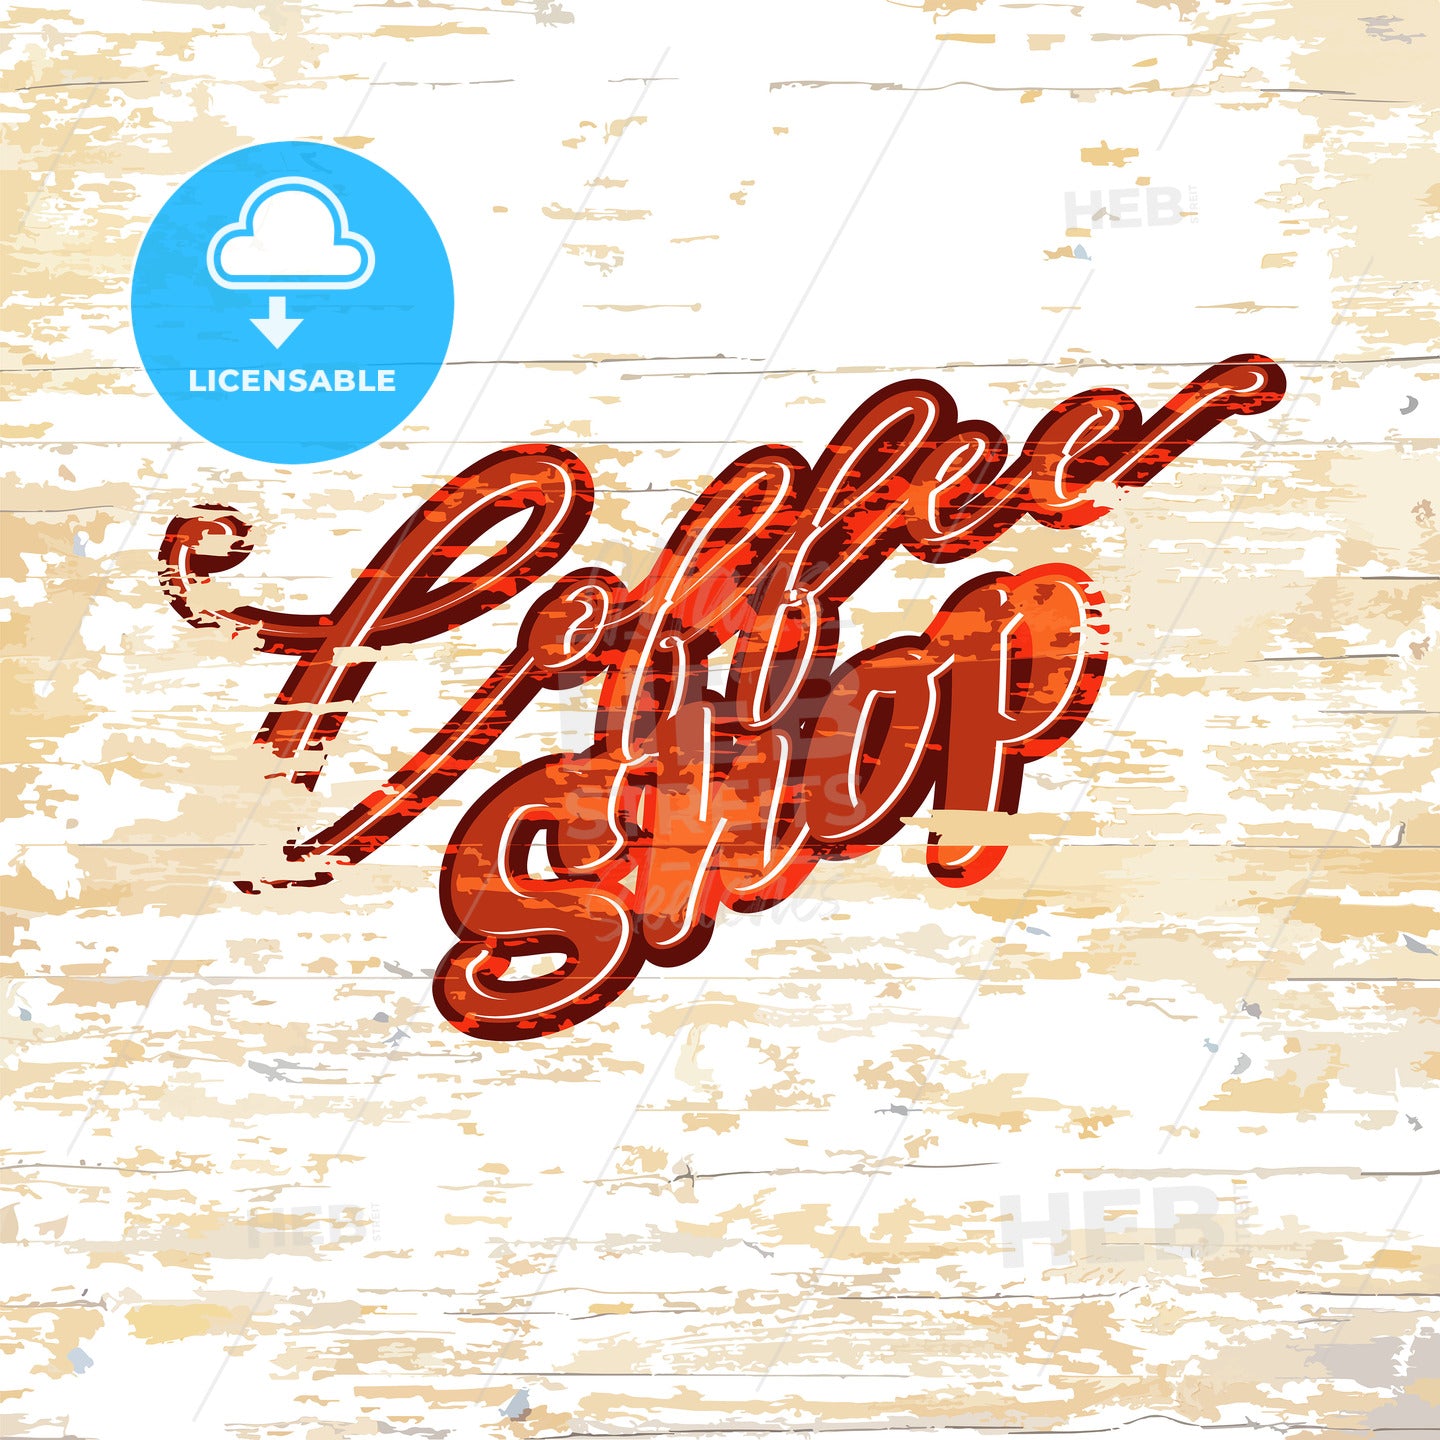 Coffee shop lettering on wooden background – instant download